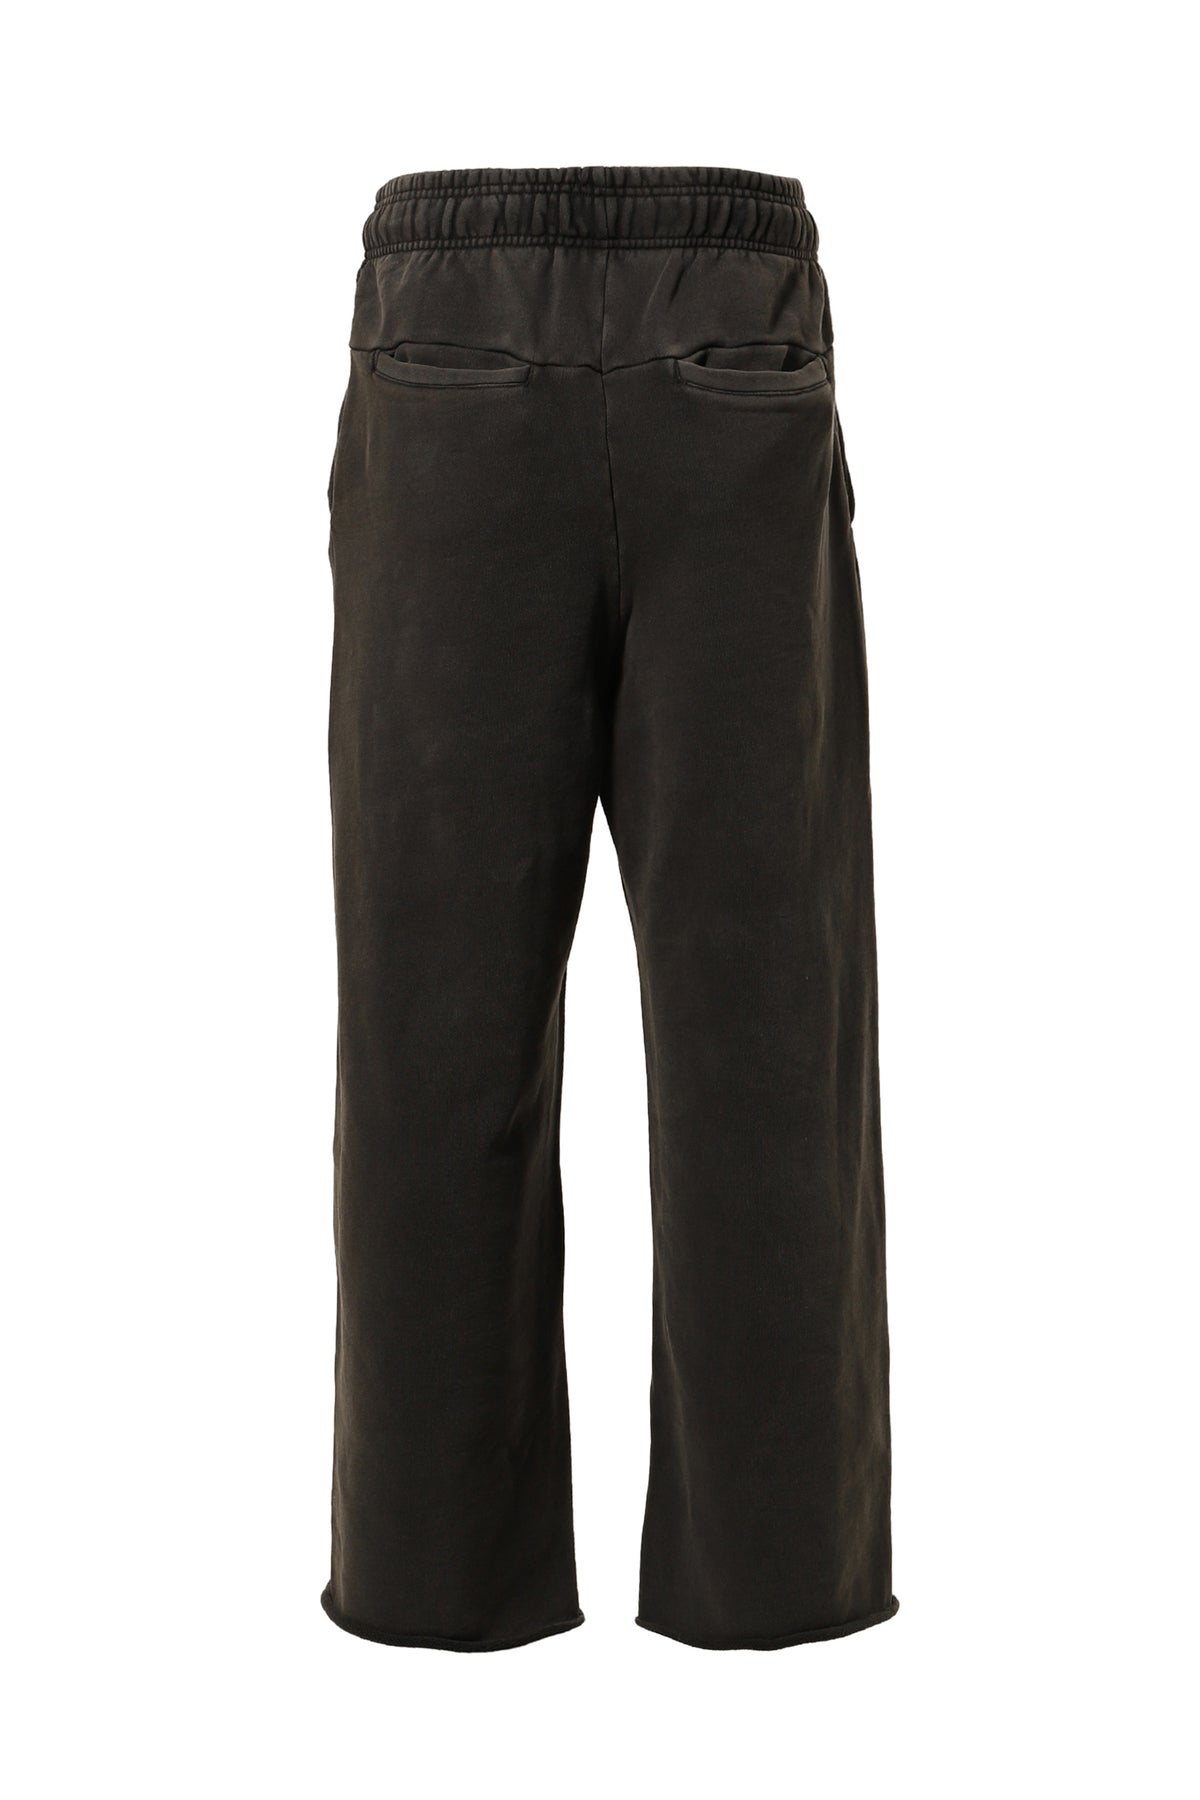 FULL SWEATPANT / WASHED BLK